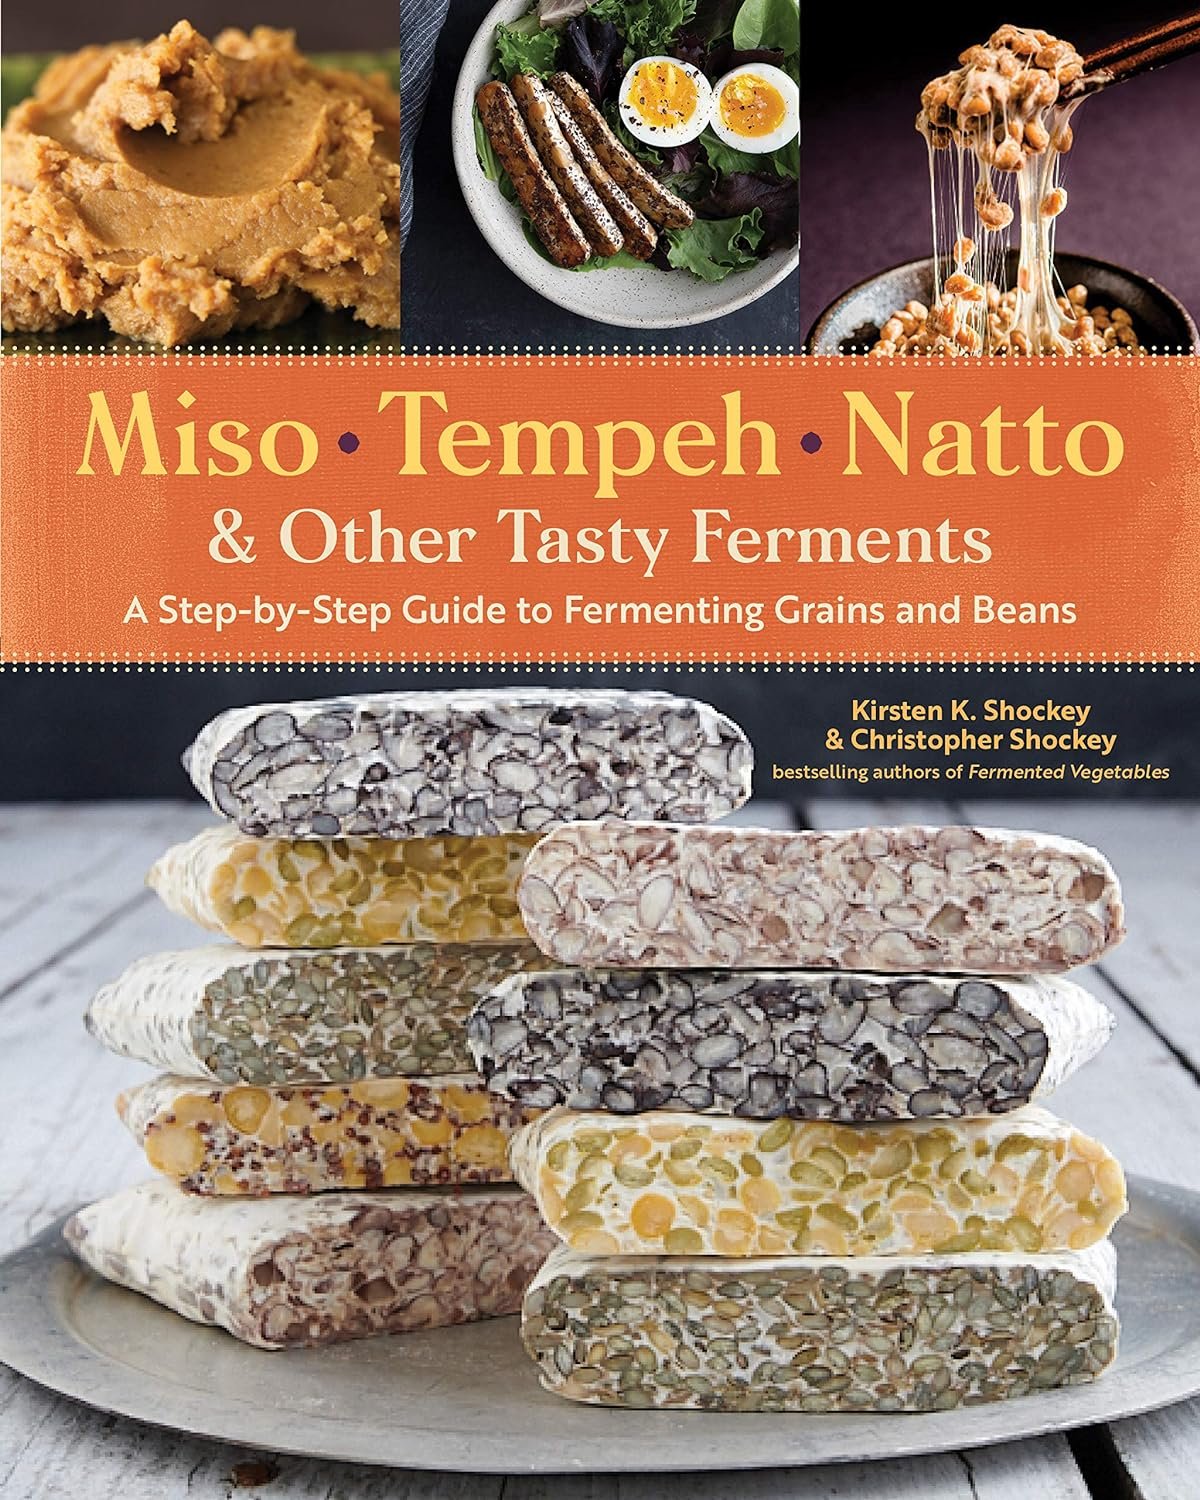 livre tempeh Natto & Other Tasty Ferments A Step-by-Step Guide to Fermenting Grains and Beans.jpg